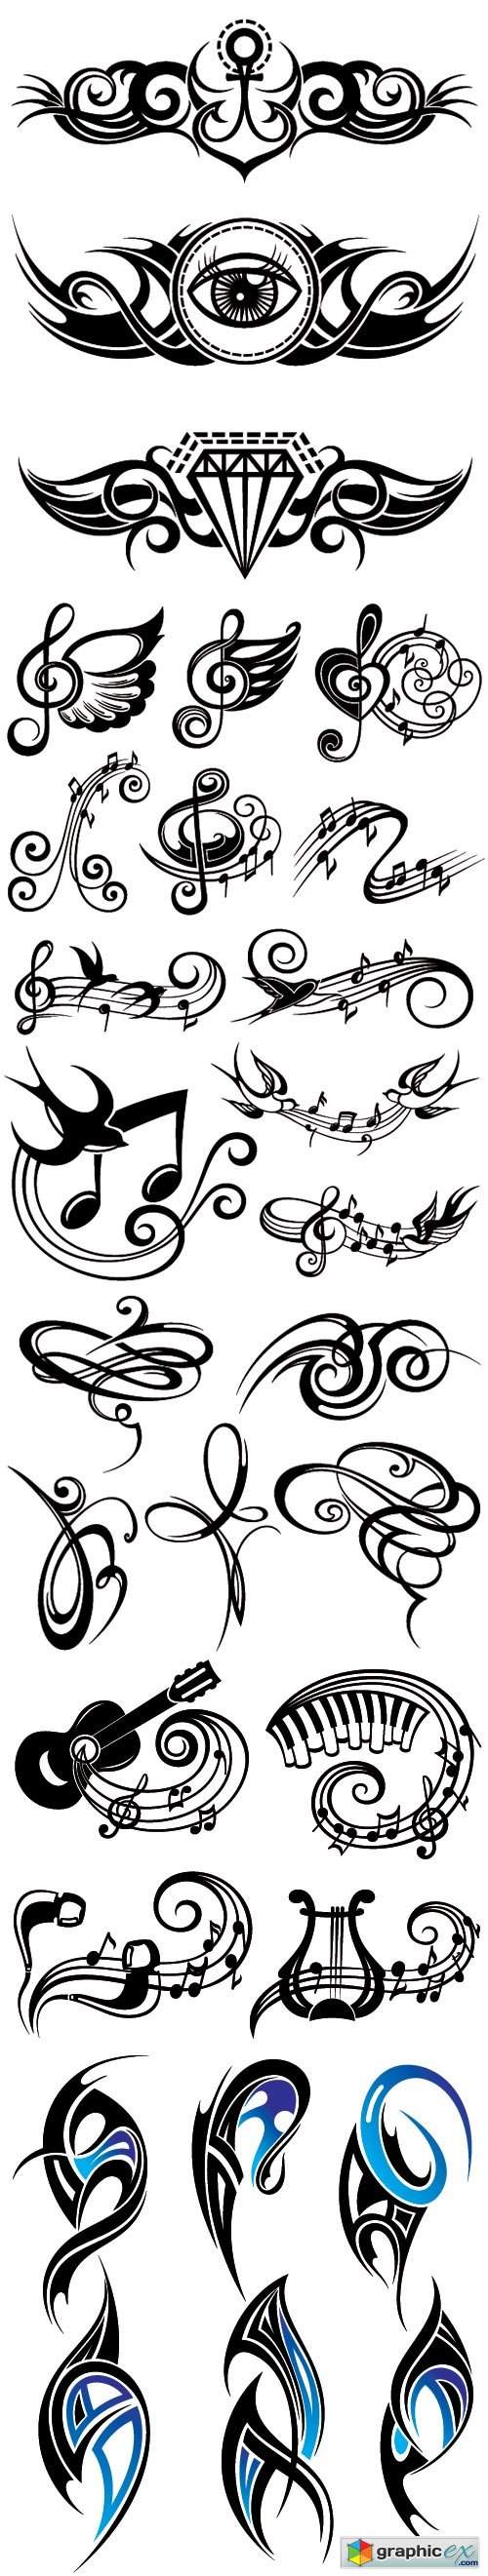  Tattoo patterns in vector 